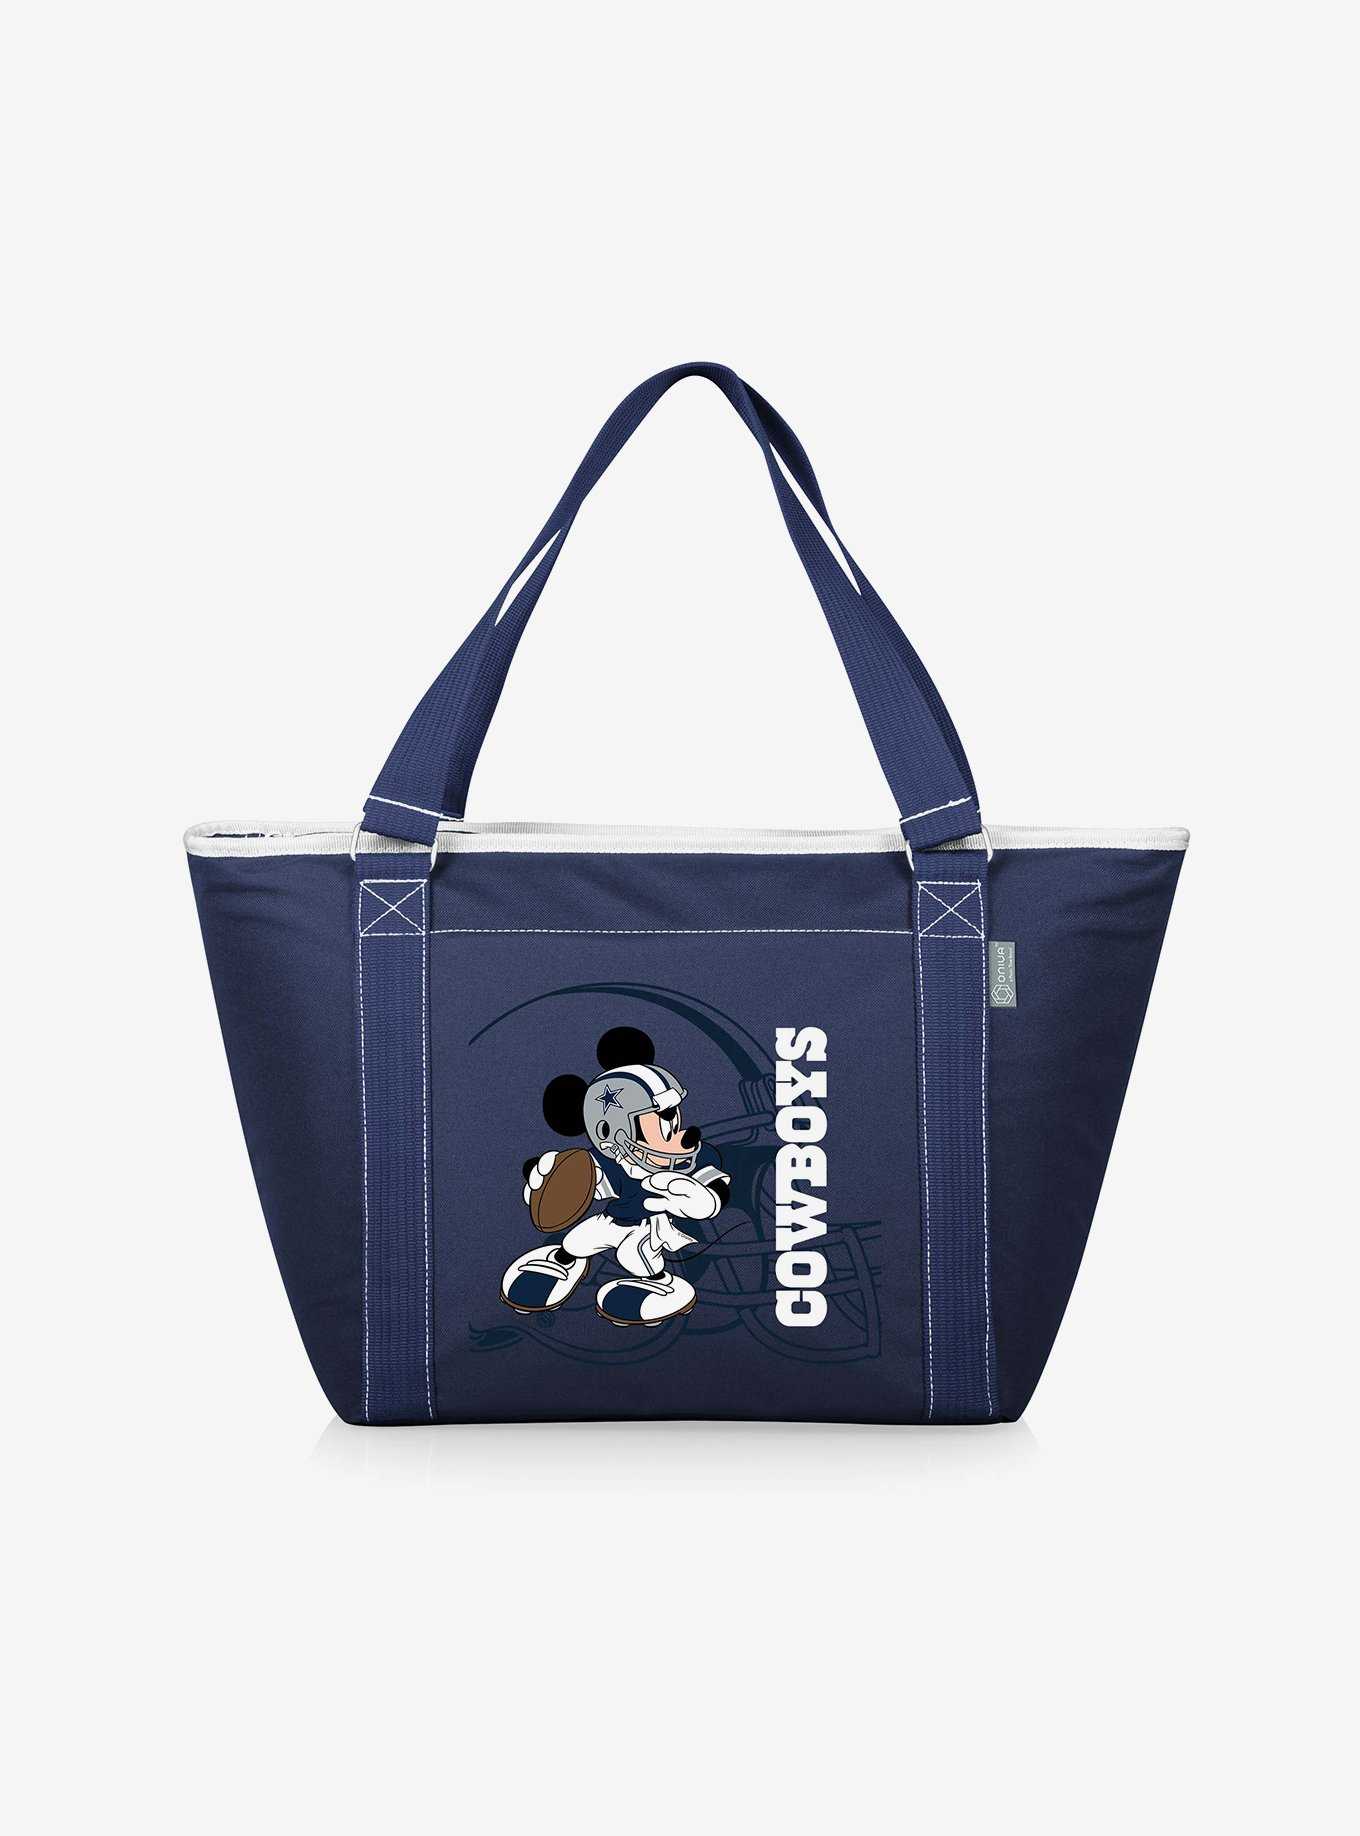 NEW Disney Bluey Lunch Box Bag Insulated Tote Coco Honey Winton Cooler